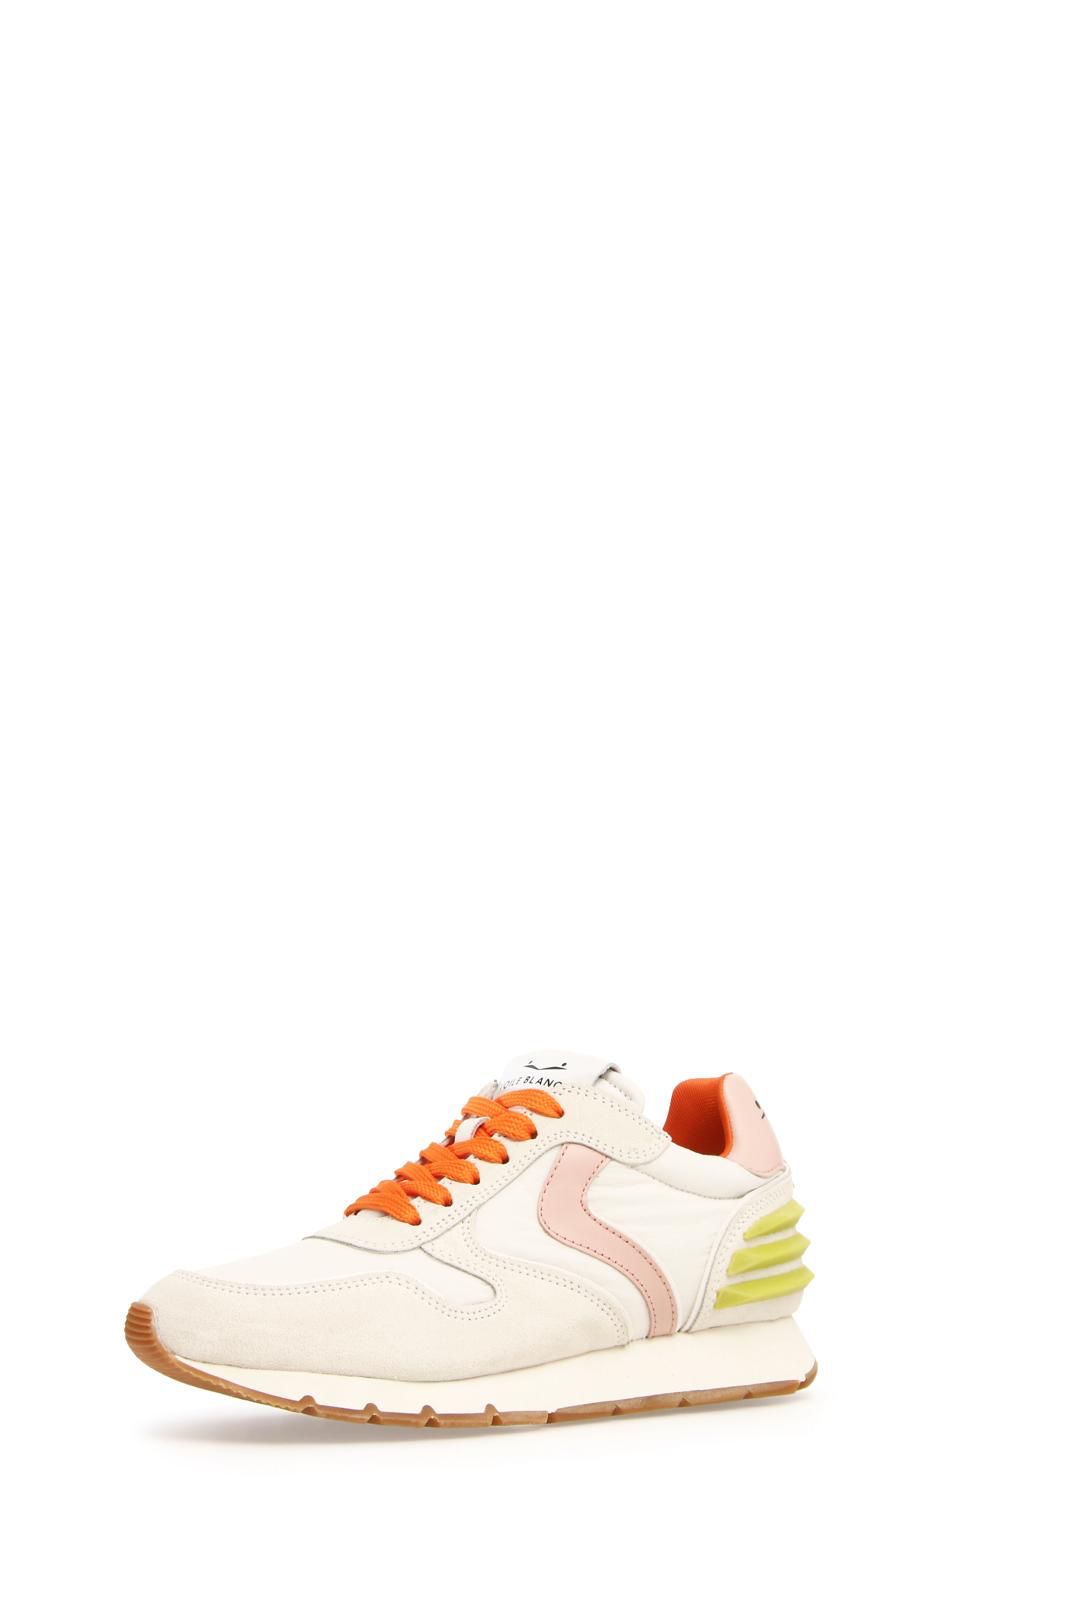 Voile Blanche Sneakers Julia power white/green